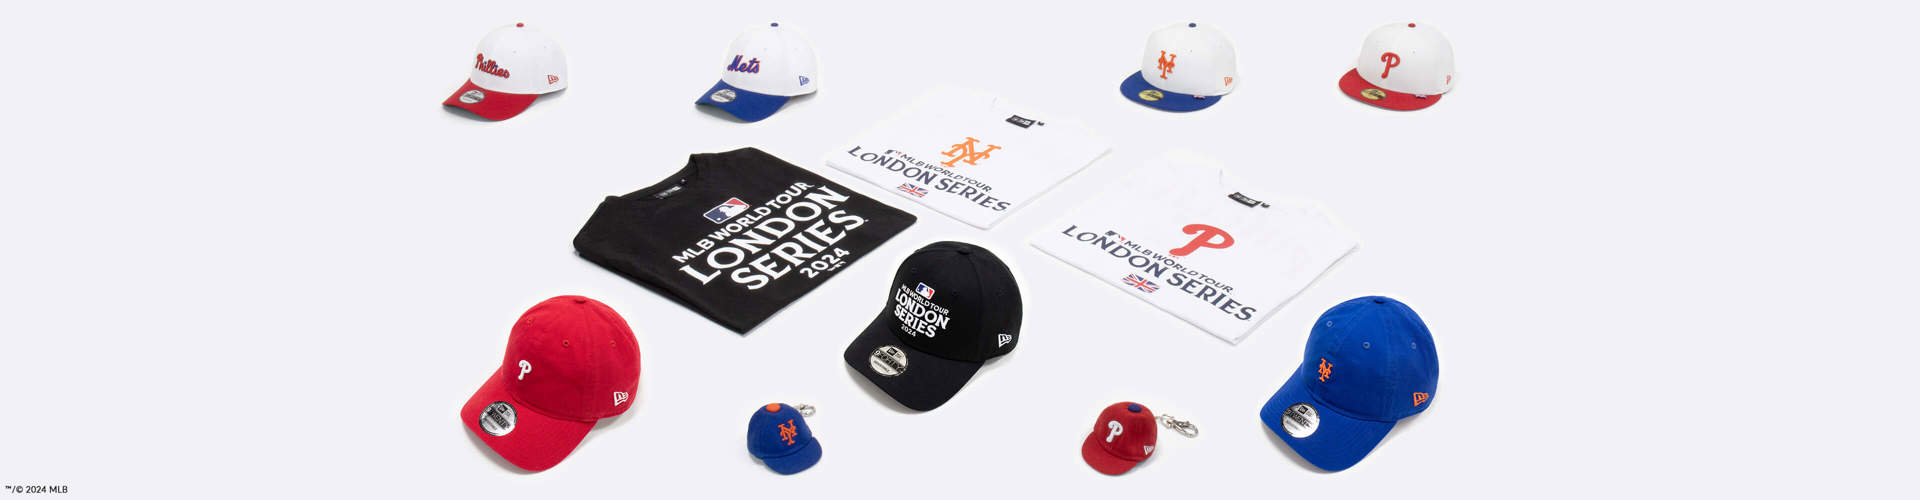 Philadelphia Phillies, New York Mets and London series collection of tops, caps and keyrings for desktop